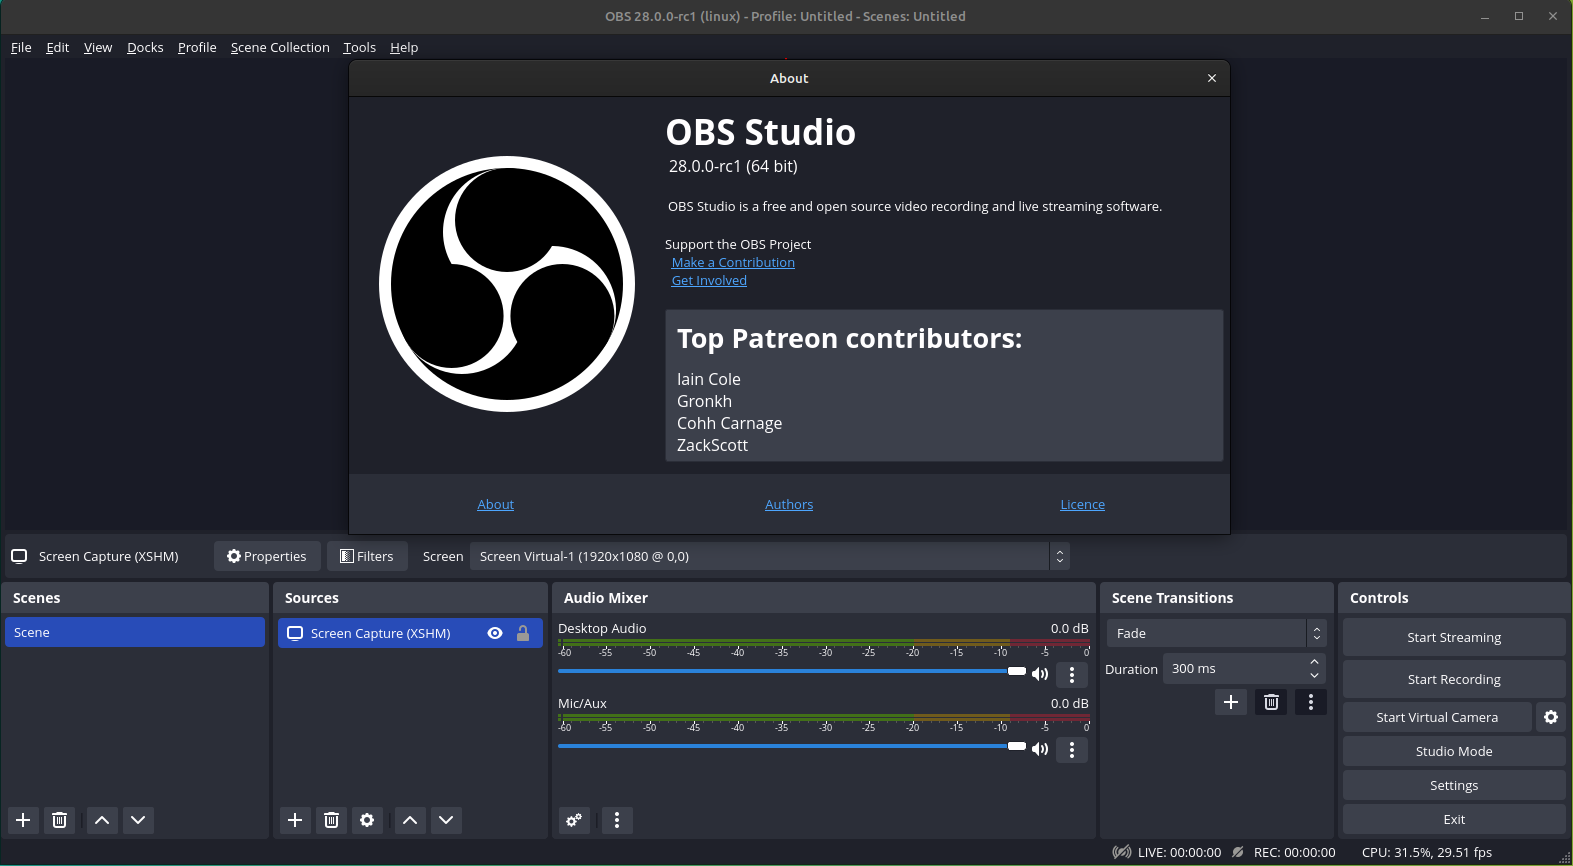 OBS Studio 28.0 is a Massive Upgrade With Qt6, HDR Support; Also Works on Apple Silicon